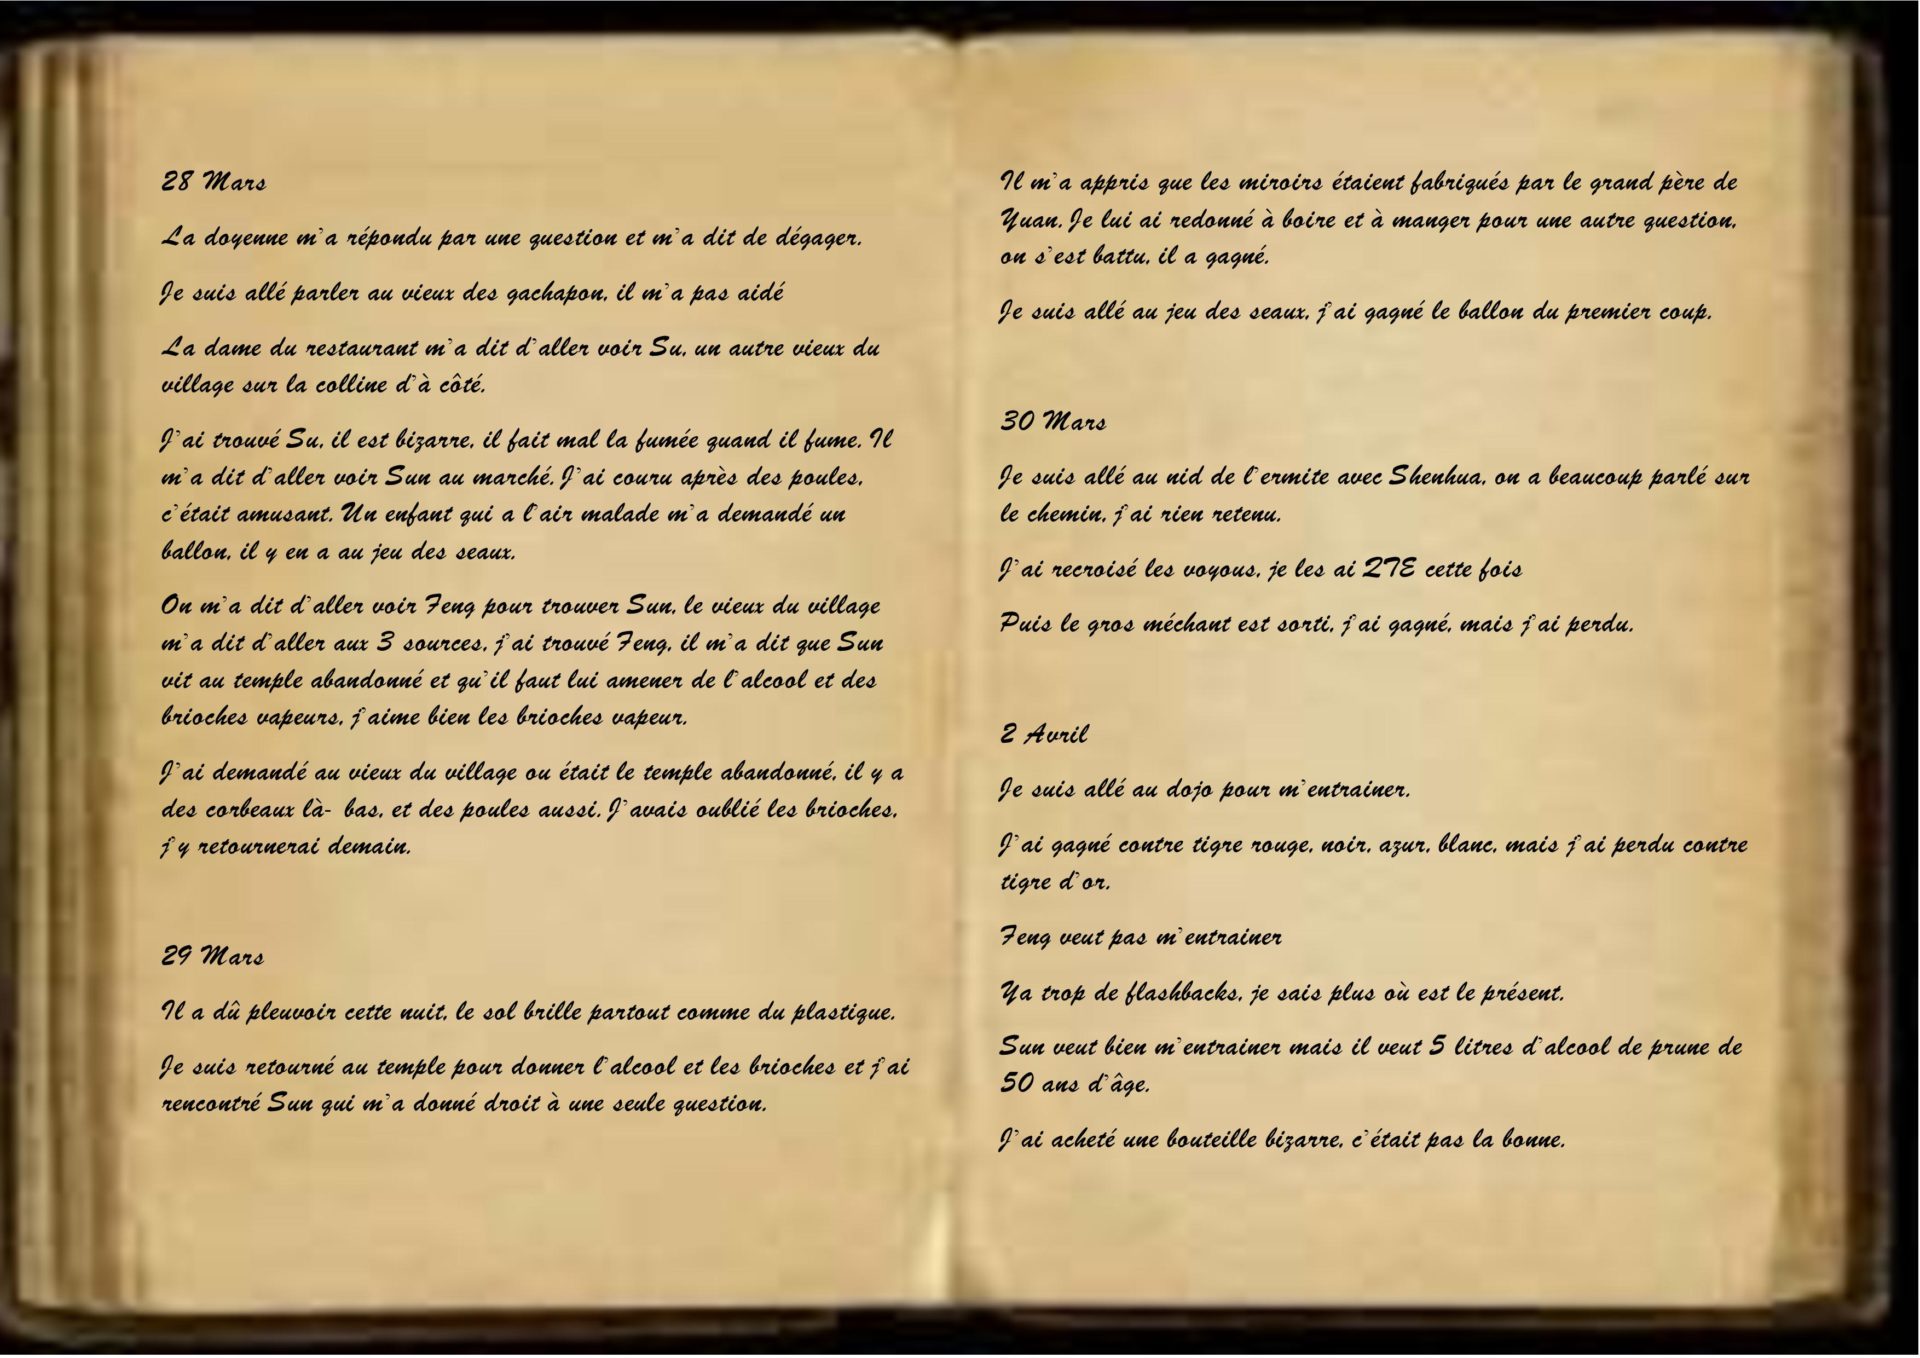 Shenmue 3 journal page 3-4